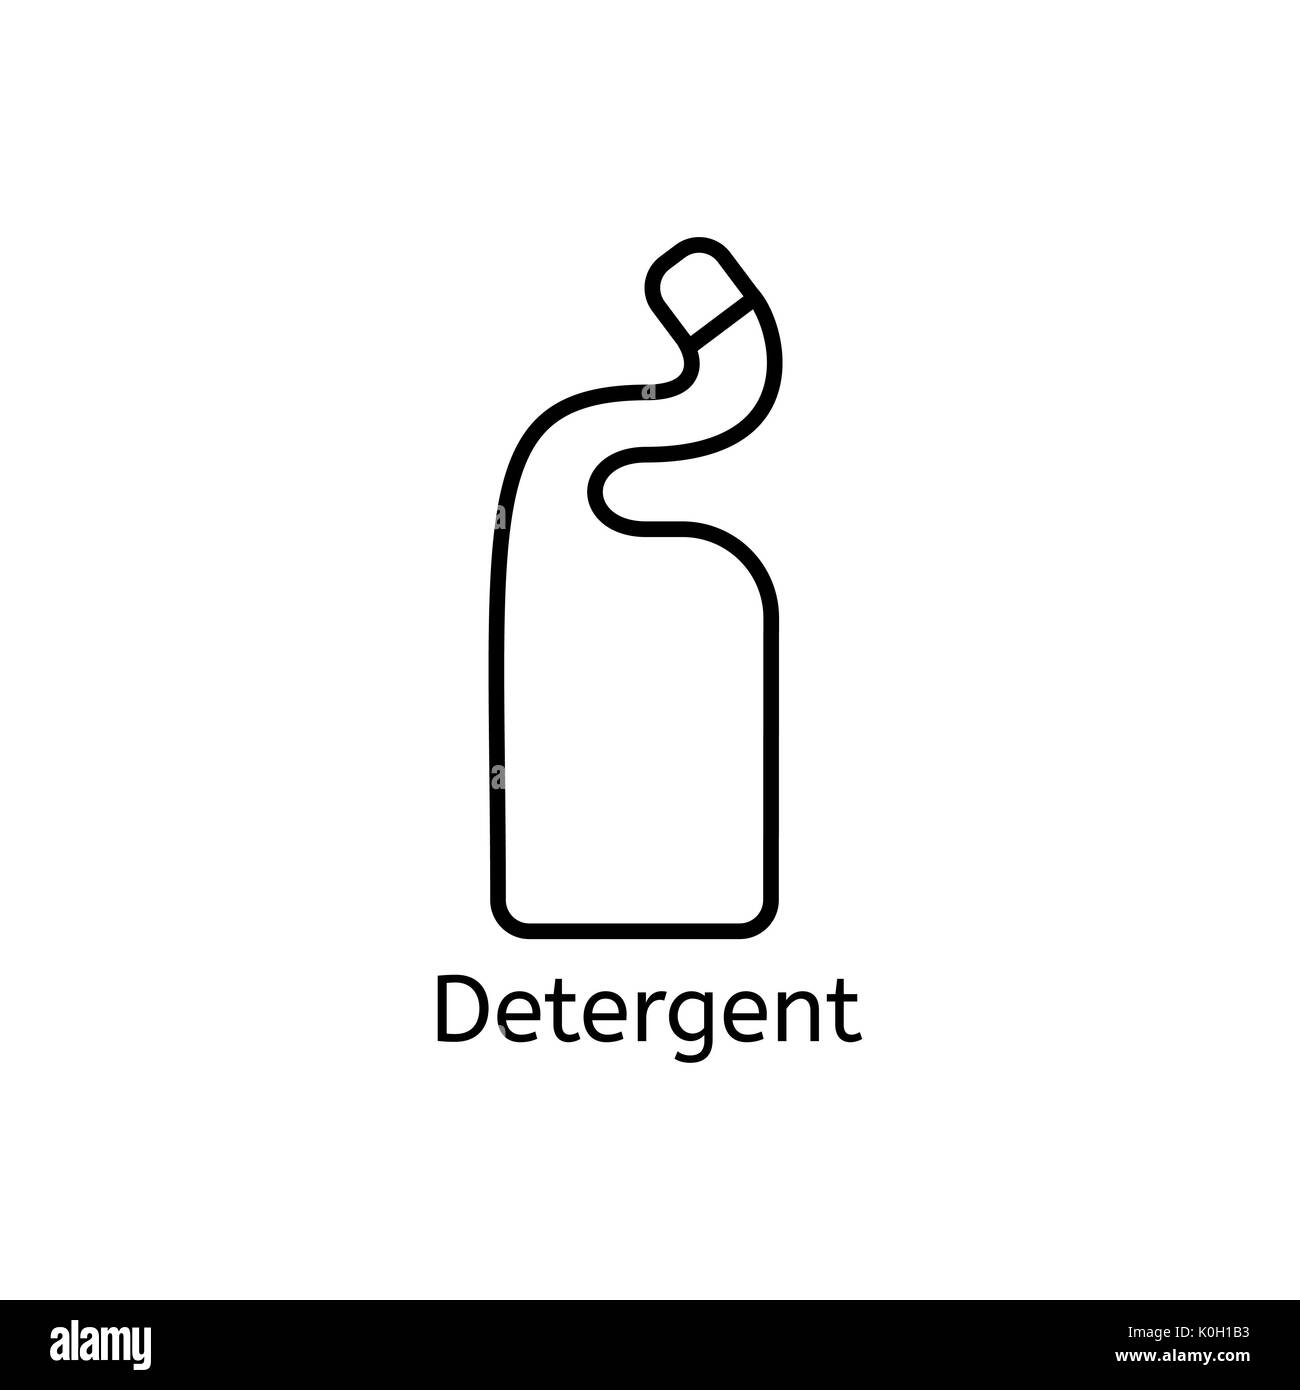 Detergents simple line icon. Liquid detergent thin linear signs. Means for cleaning simple concept for websites, infographic, mobile app. Stock Photo